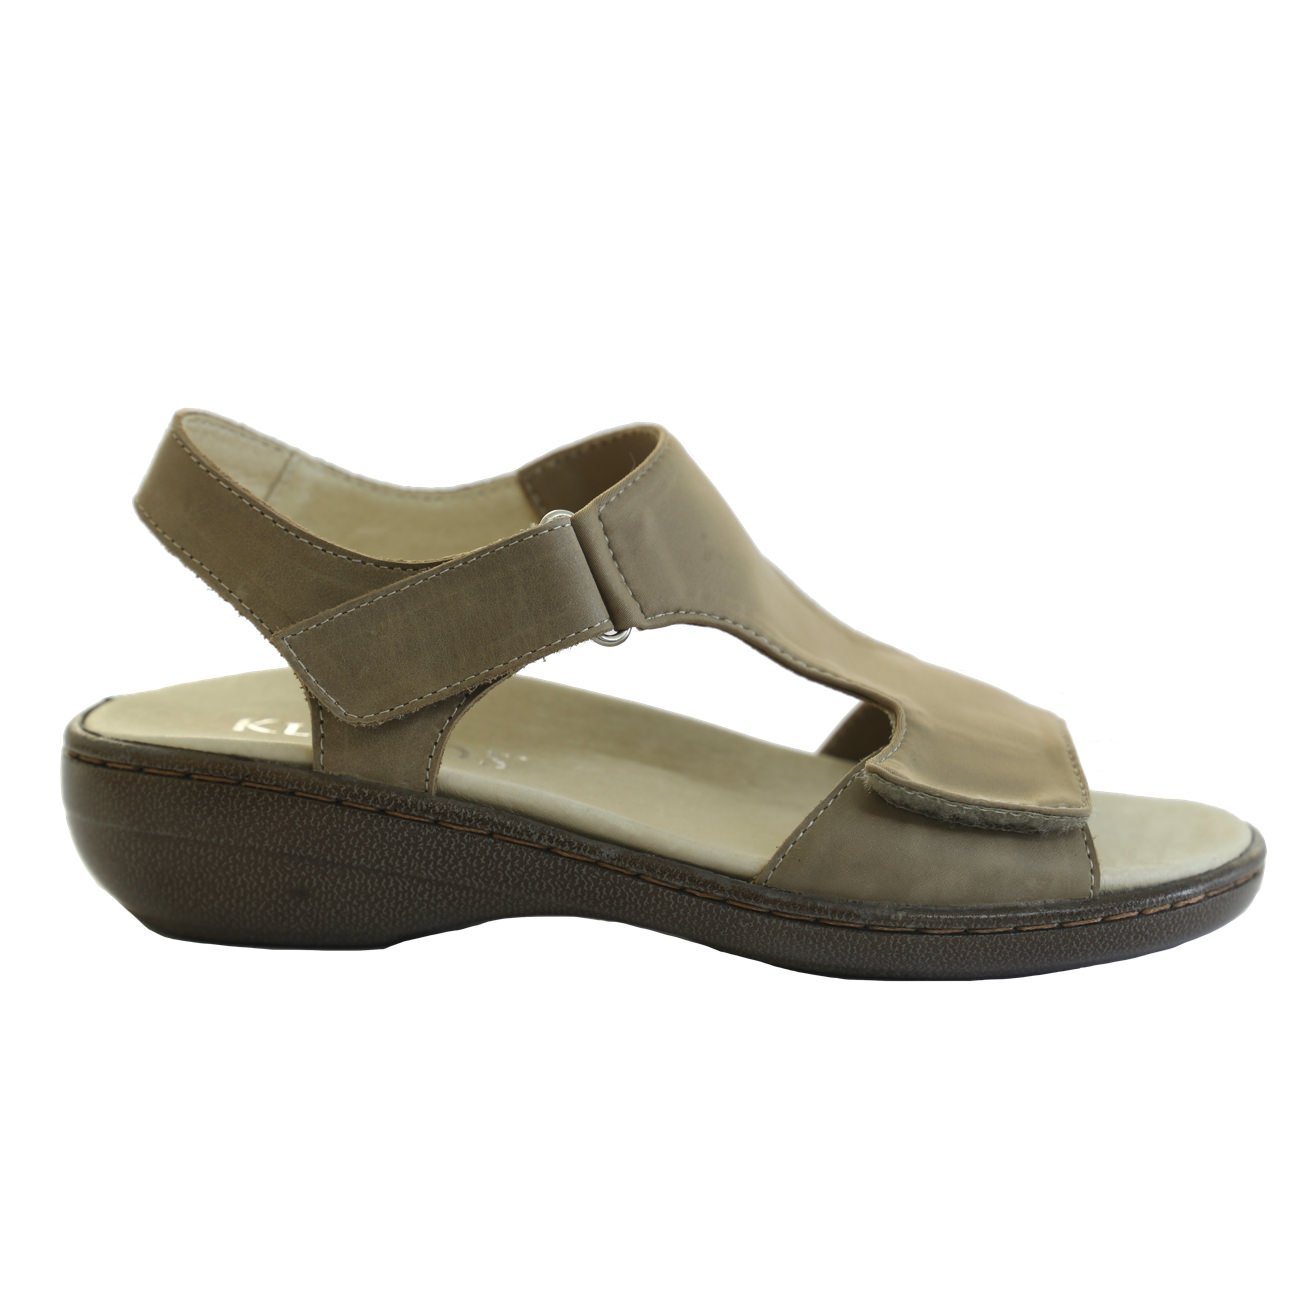 Klouds, Adele Stretch, Sandal, Leather, Stone Sandals Klouds Stone 36 